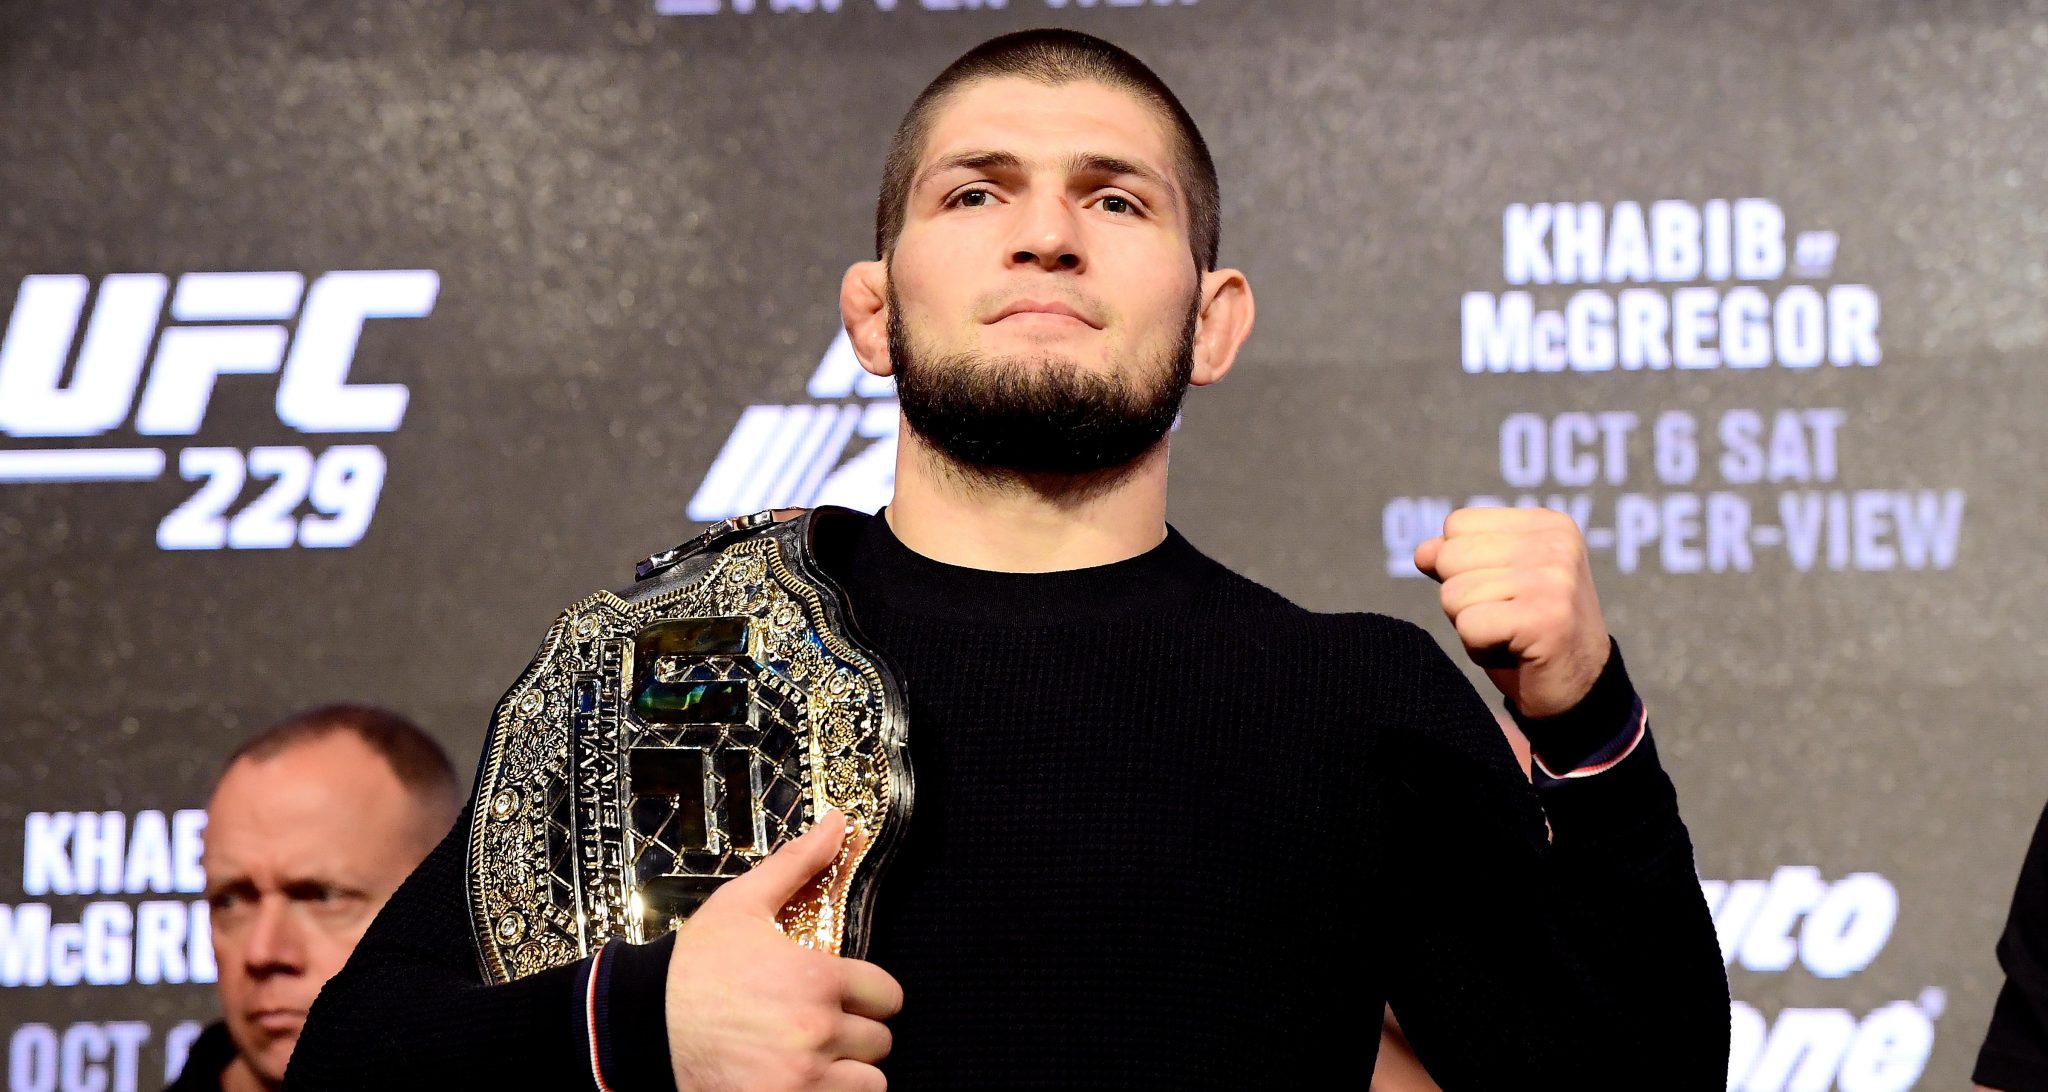 Lightweight Champion Khabib Nurmagomedov poses for photos during the UFC 229 Press Conference